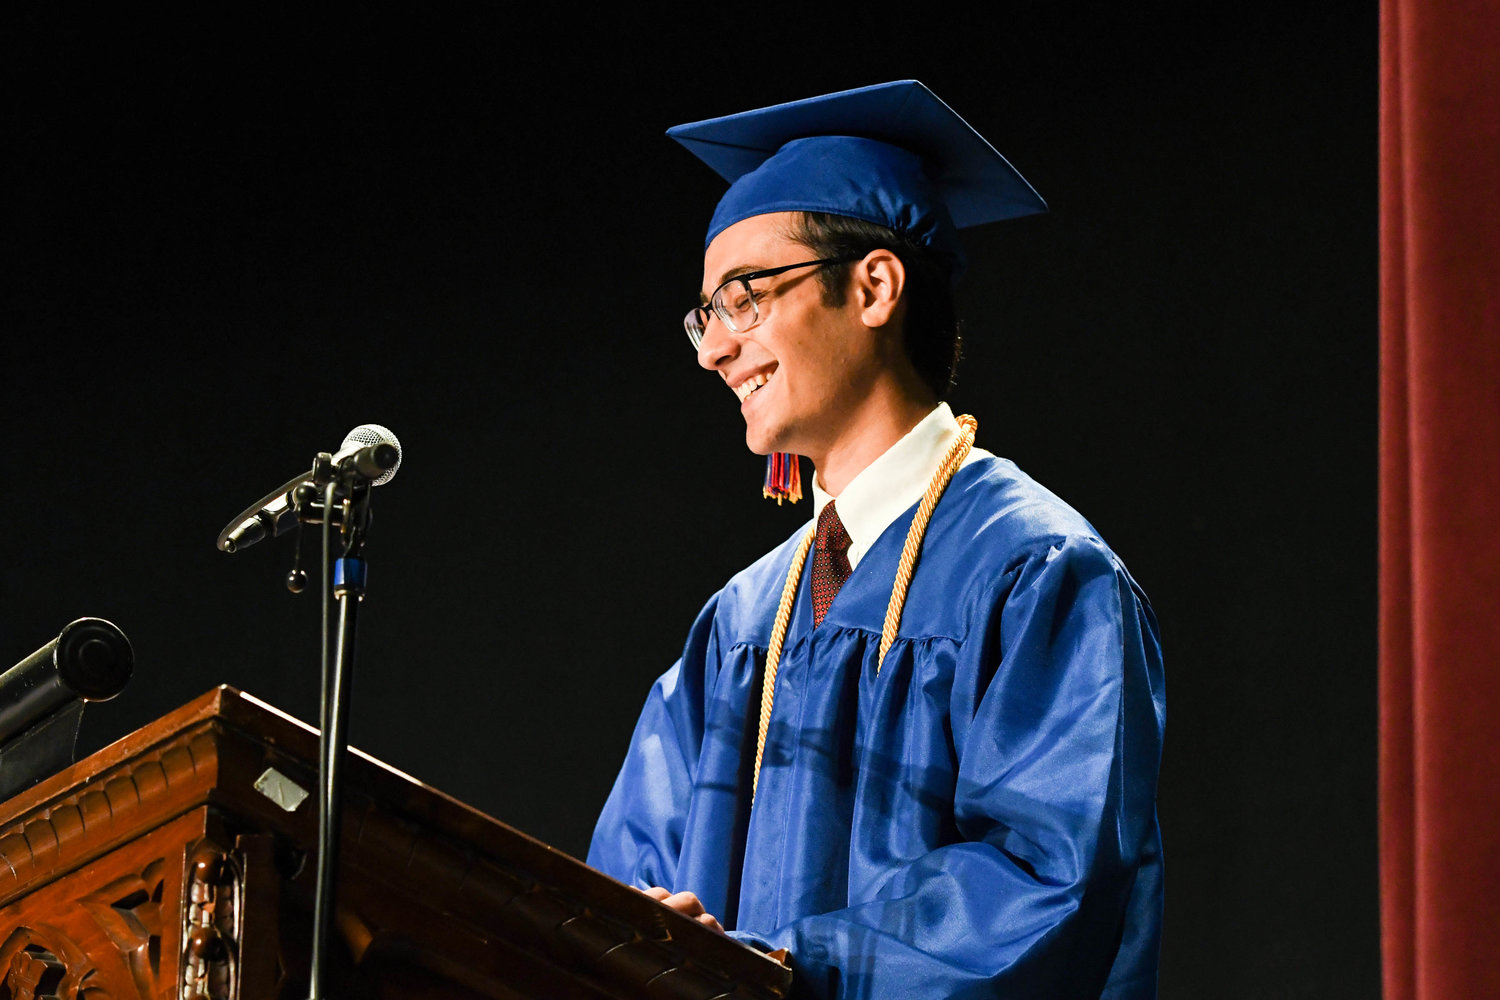 New Hartford Class President Deen Kaakour speaks during the annual commencement ceremony for New Hartford High School on Saturday at The Stanley Theatre in Utica.